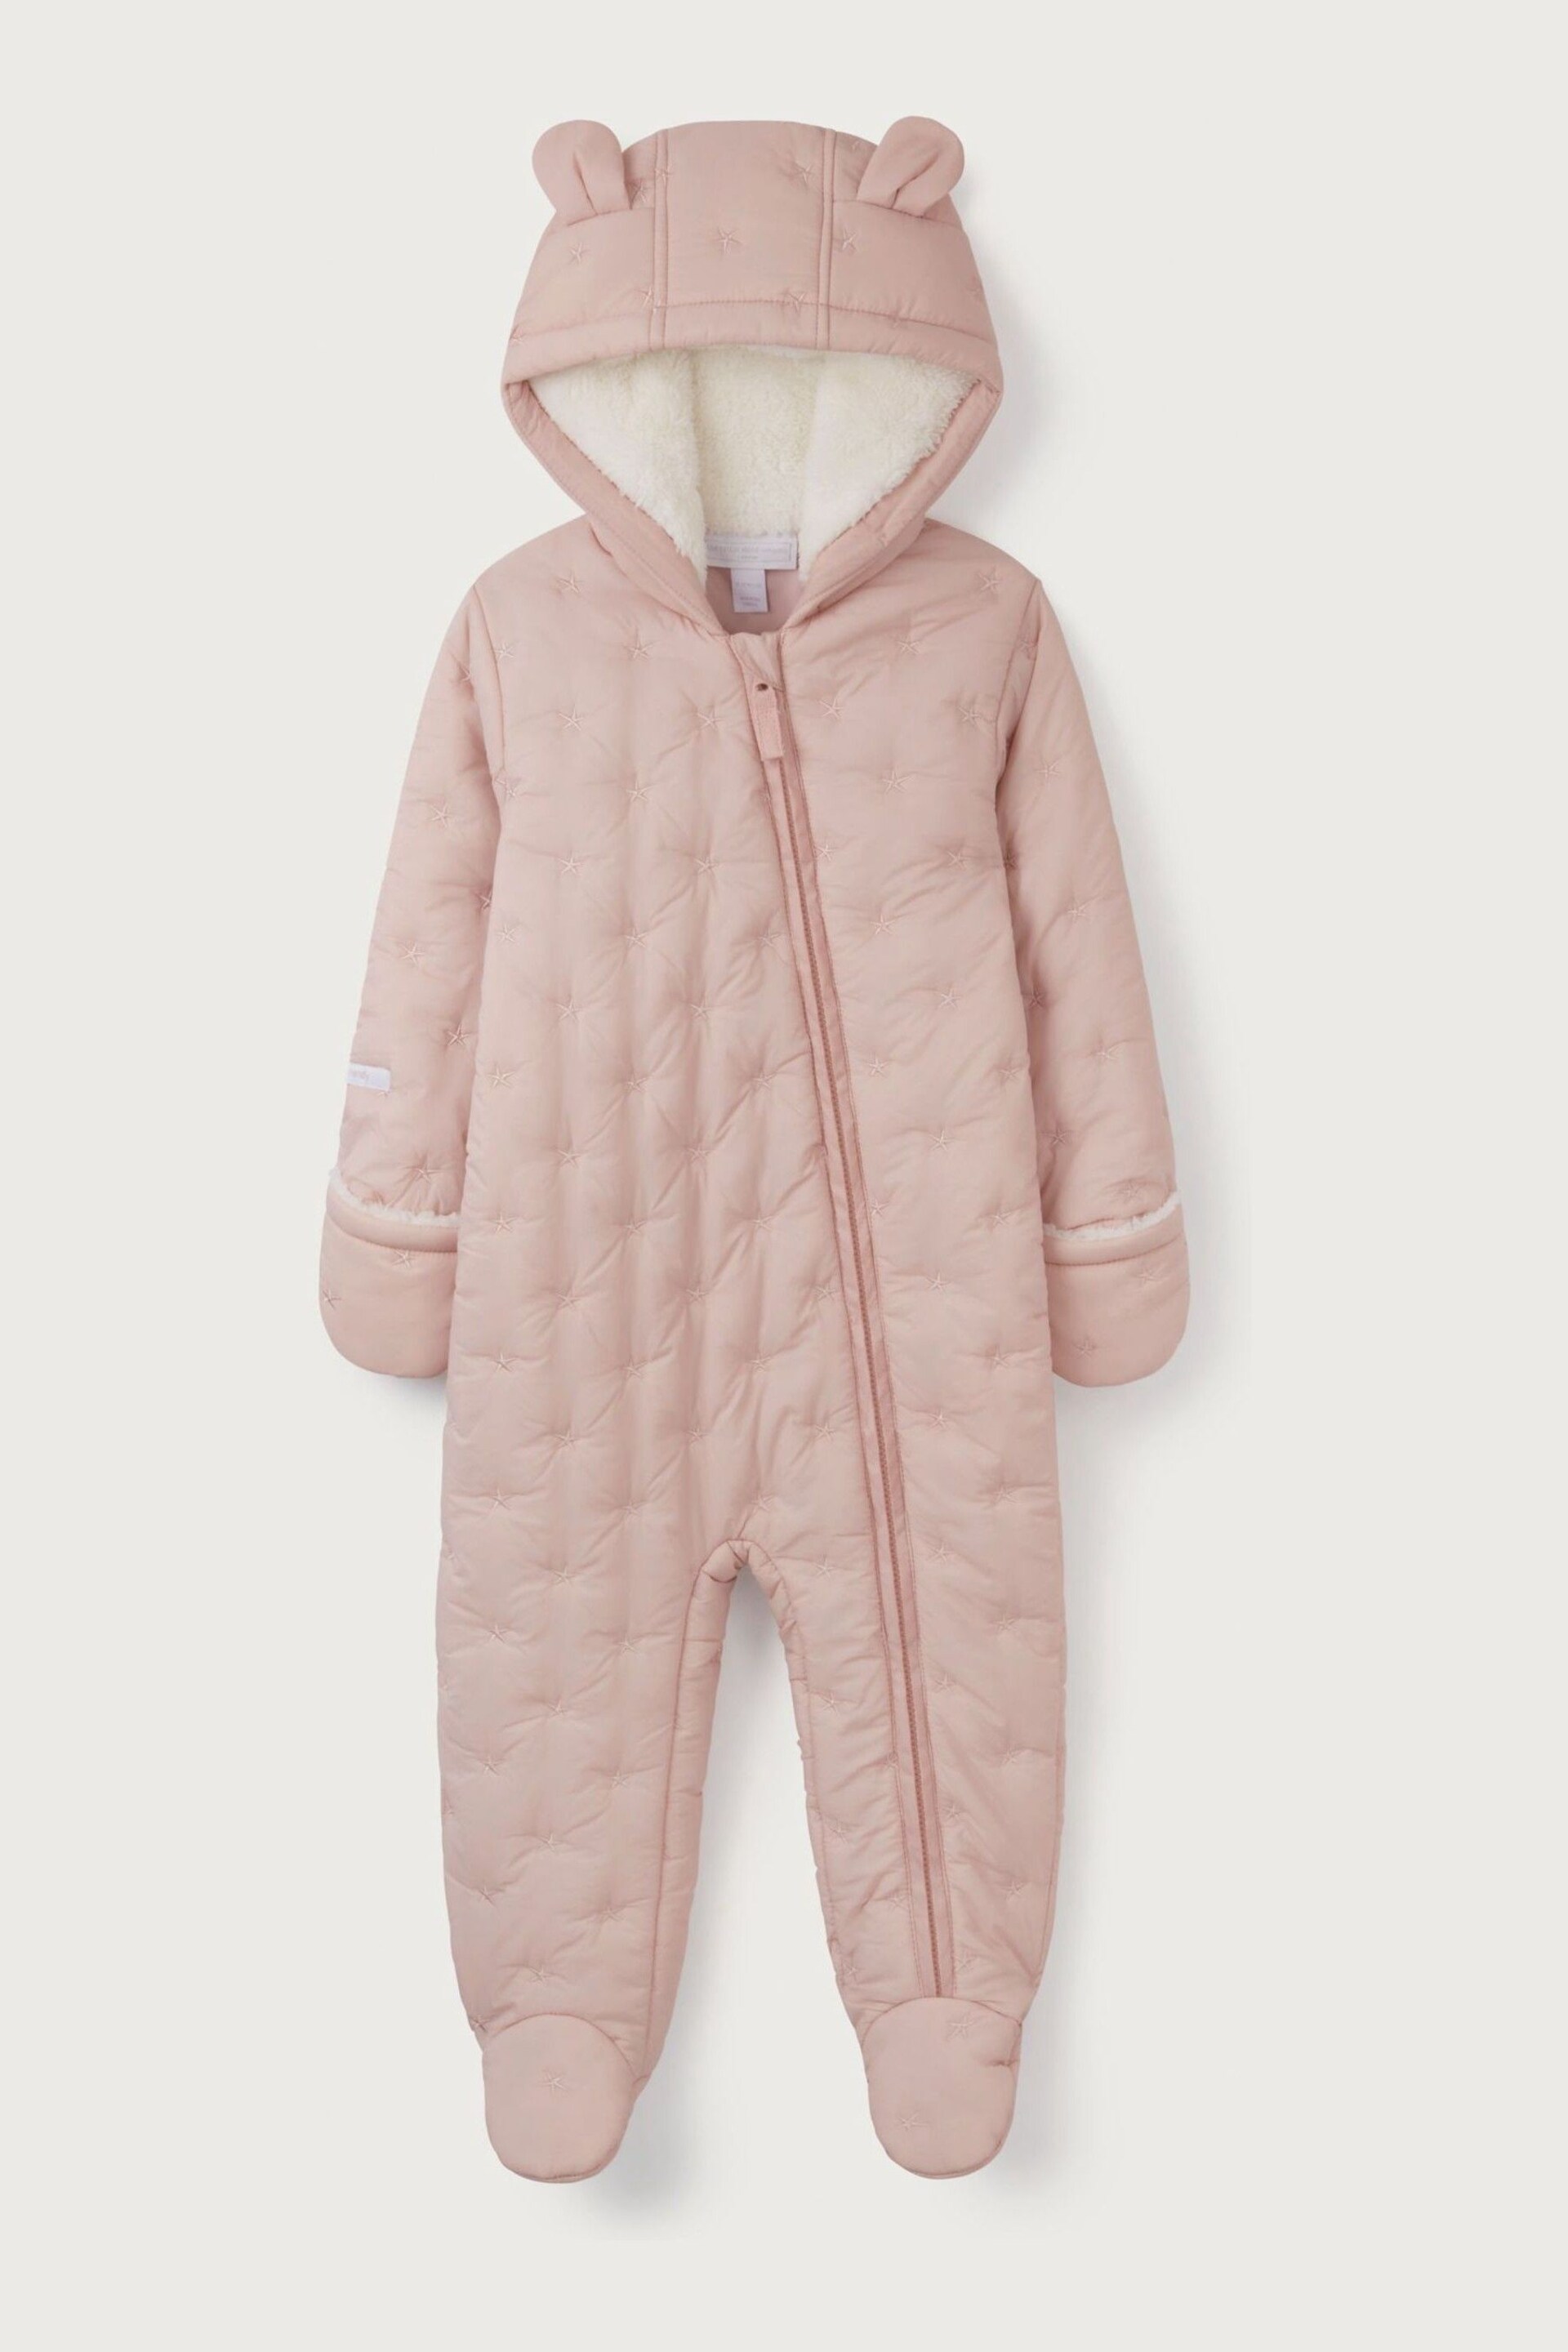 The White Company Pink Star Quilted Pramsuit - Image 5 of 6